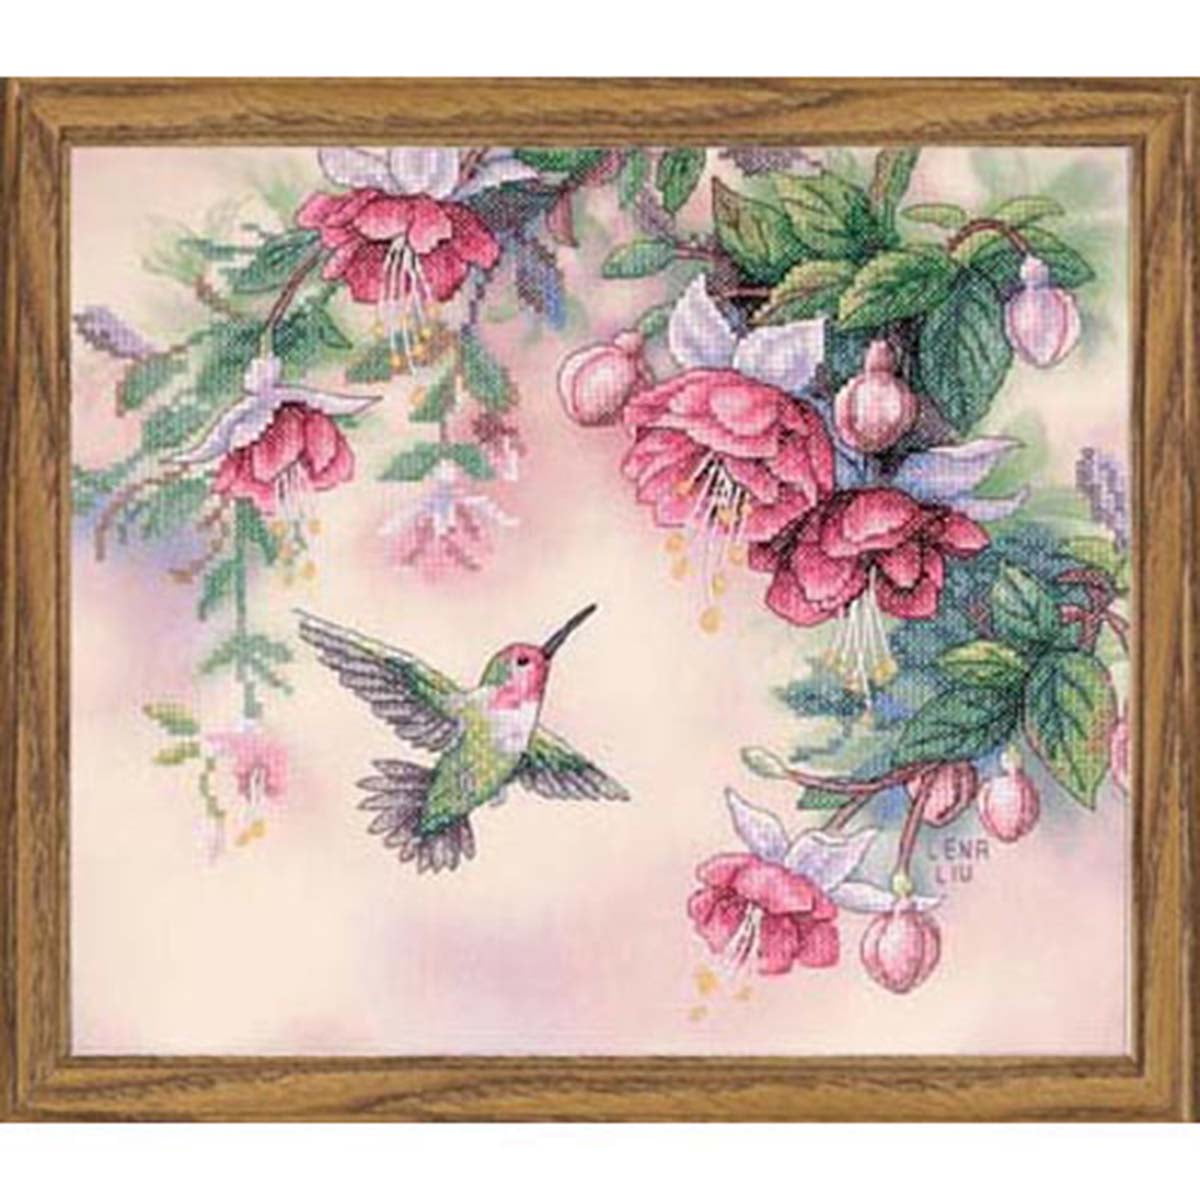 Cross Stitch Stamped Kits Pre-Printed ing Patterns for Beginner Kids  Adults, Embroidery Needlepoint Starter Kits,Little Birds 14CT 